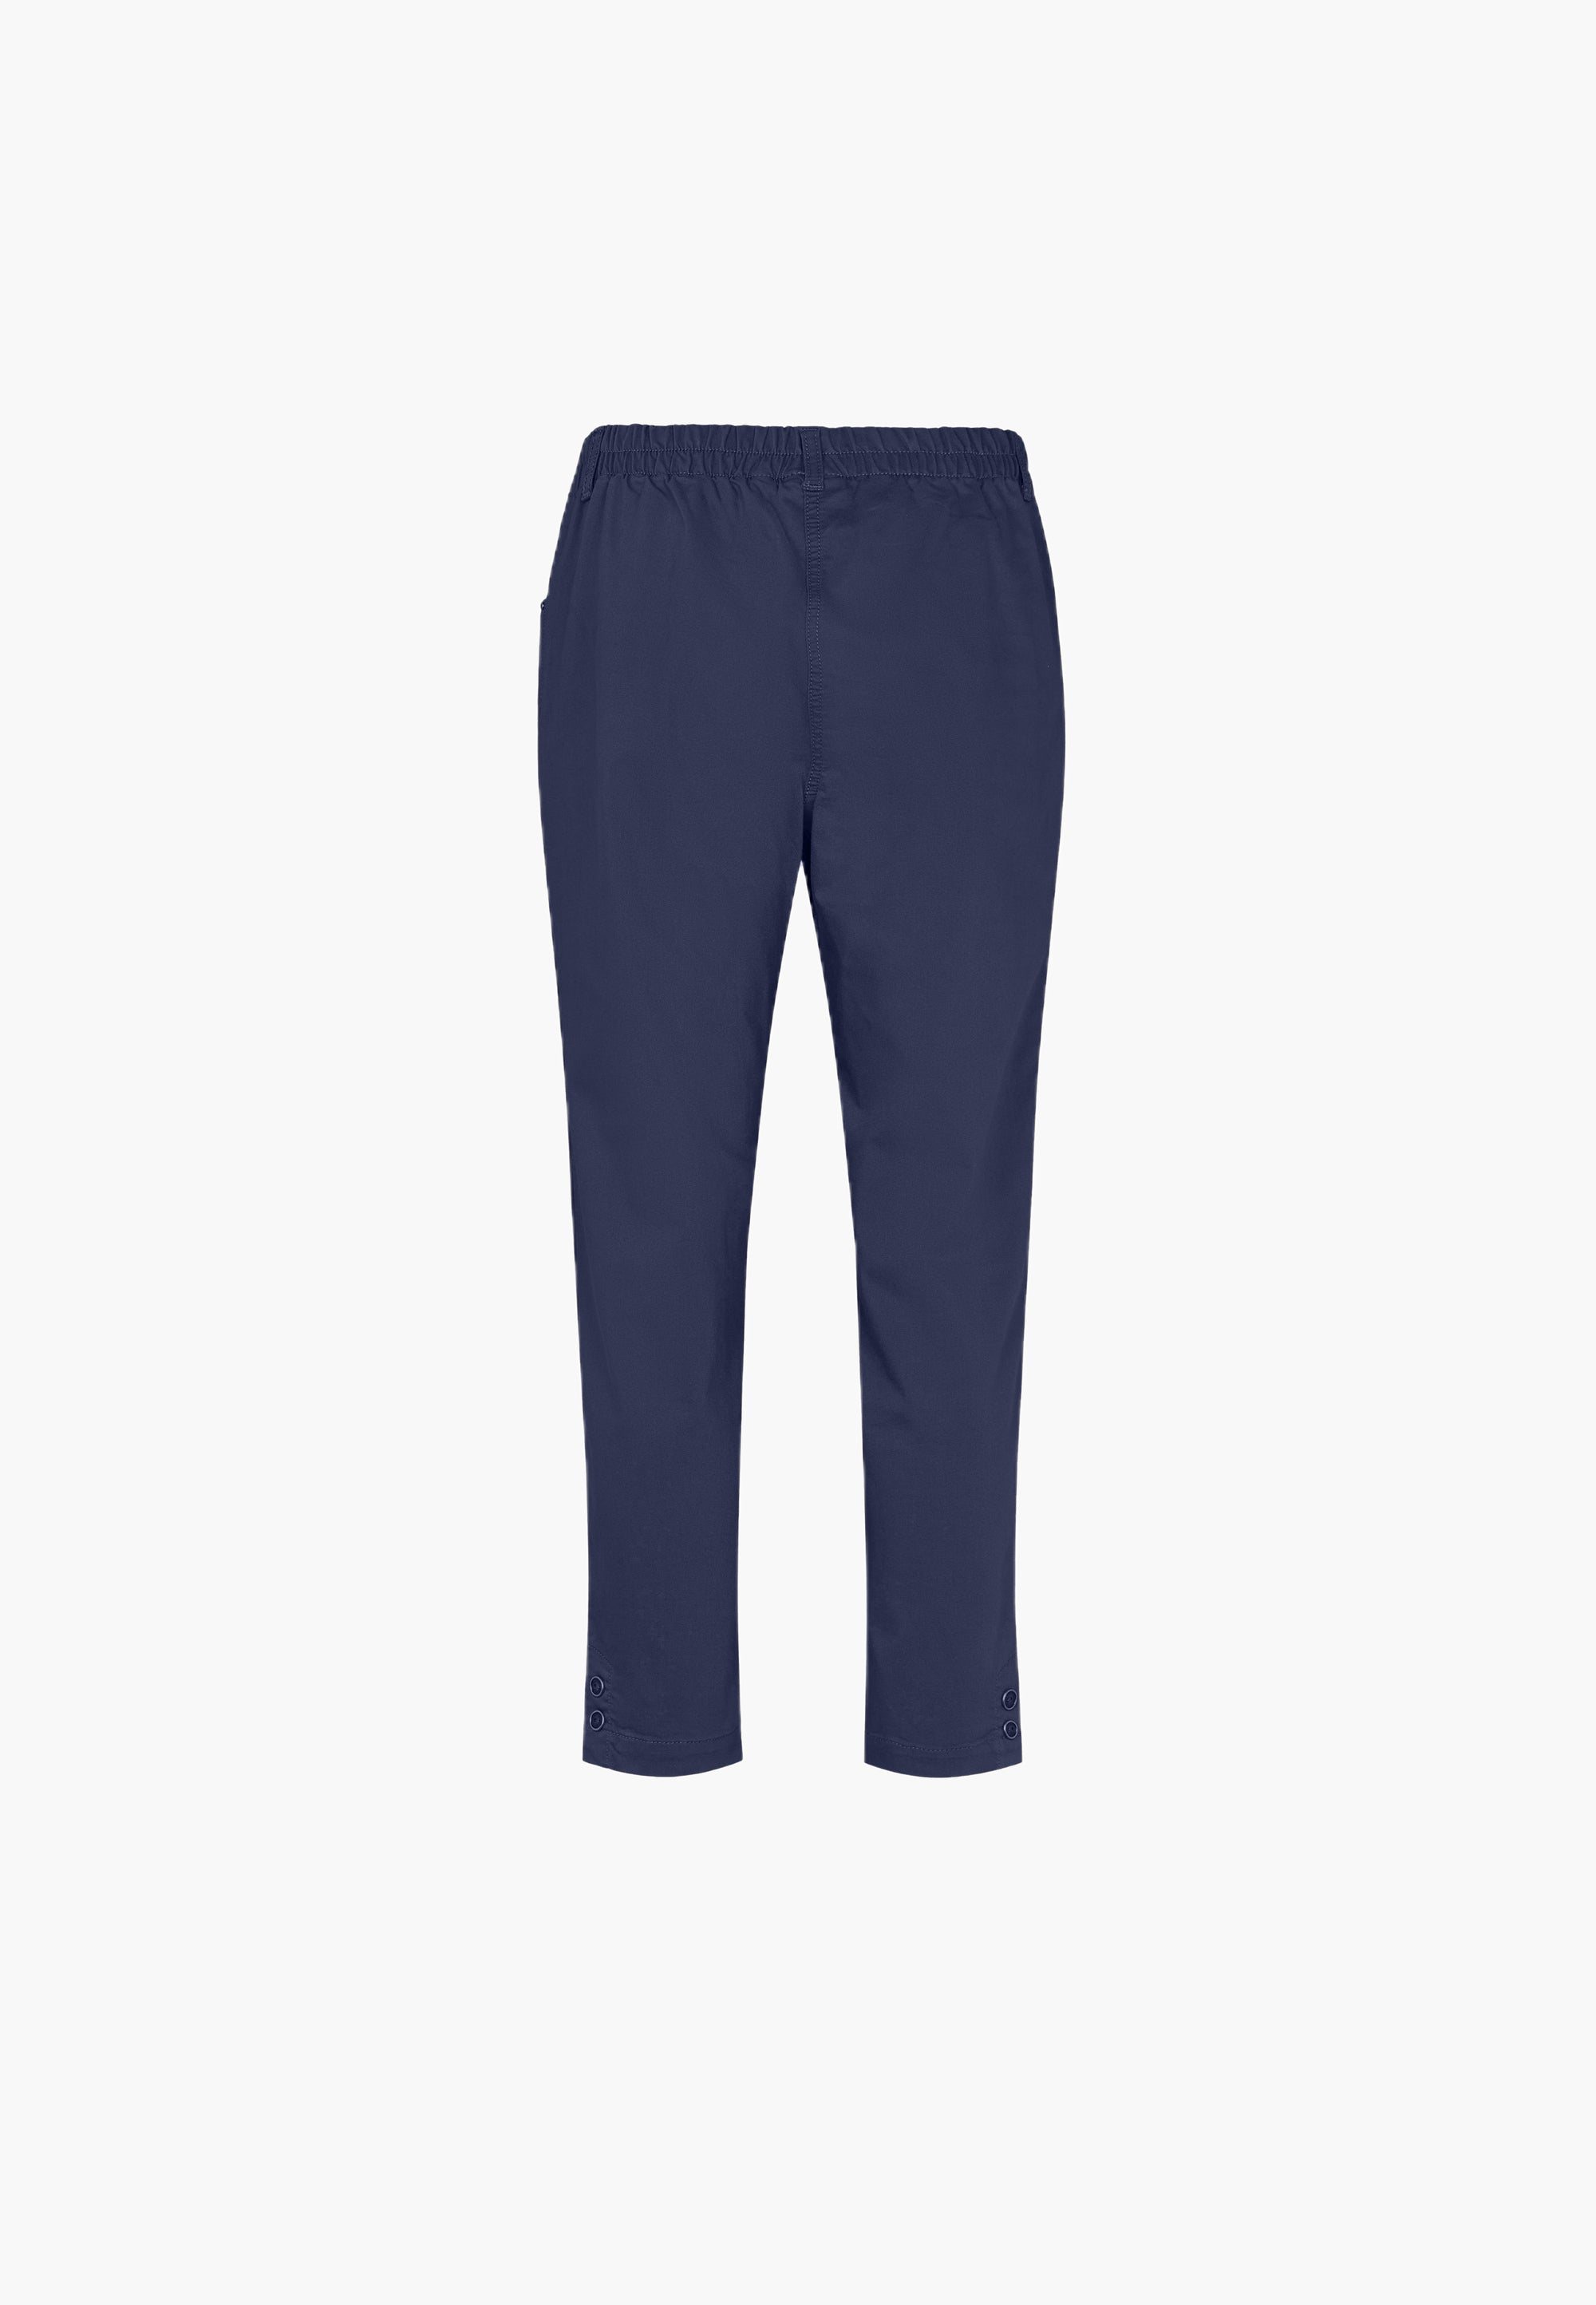 LAURIE  Ellie Relaxed - Extra Short Length Trousers RELAXED 49000 Navy